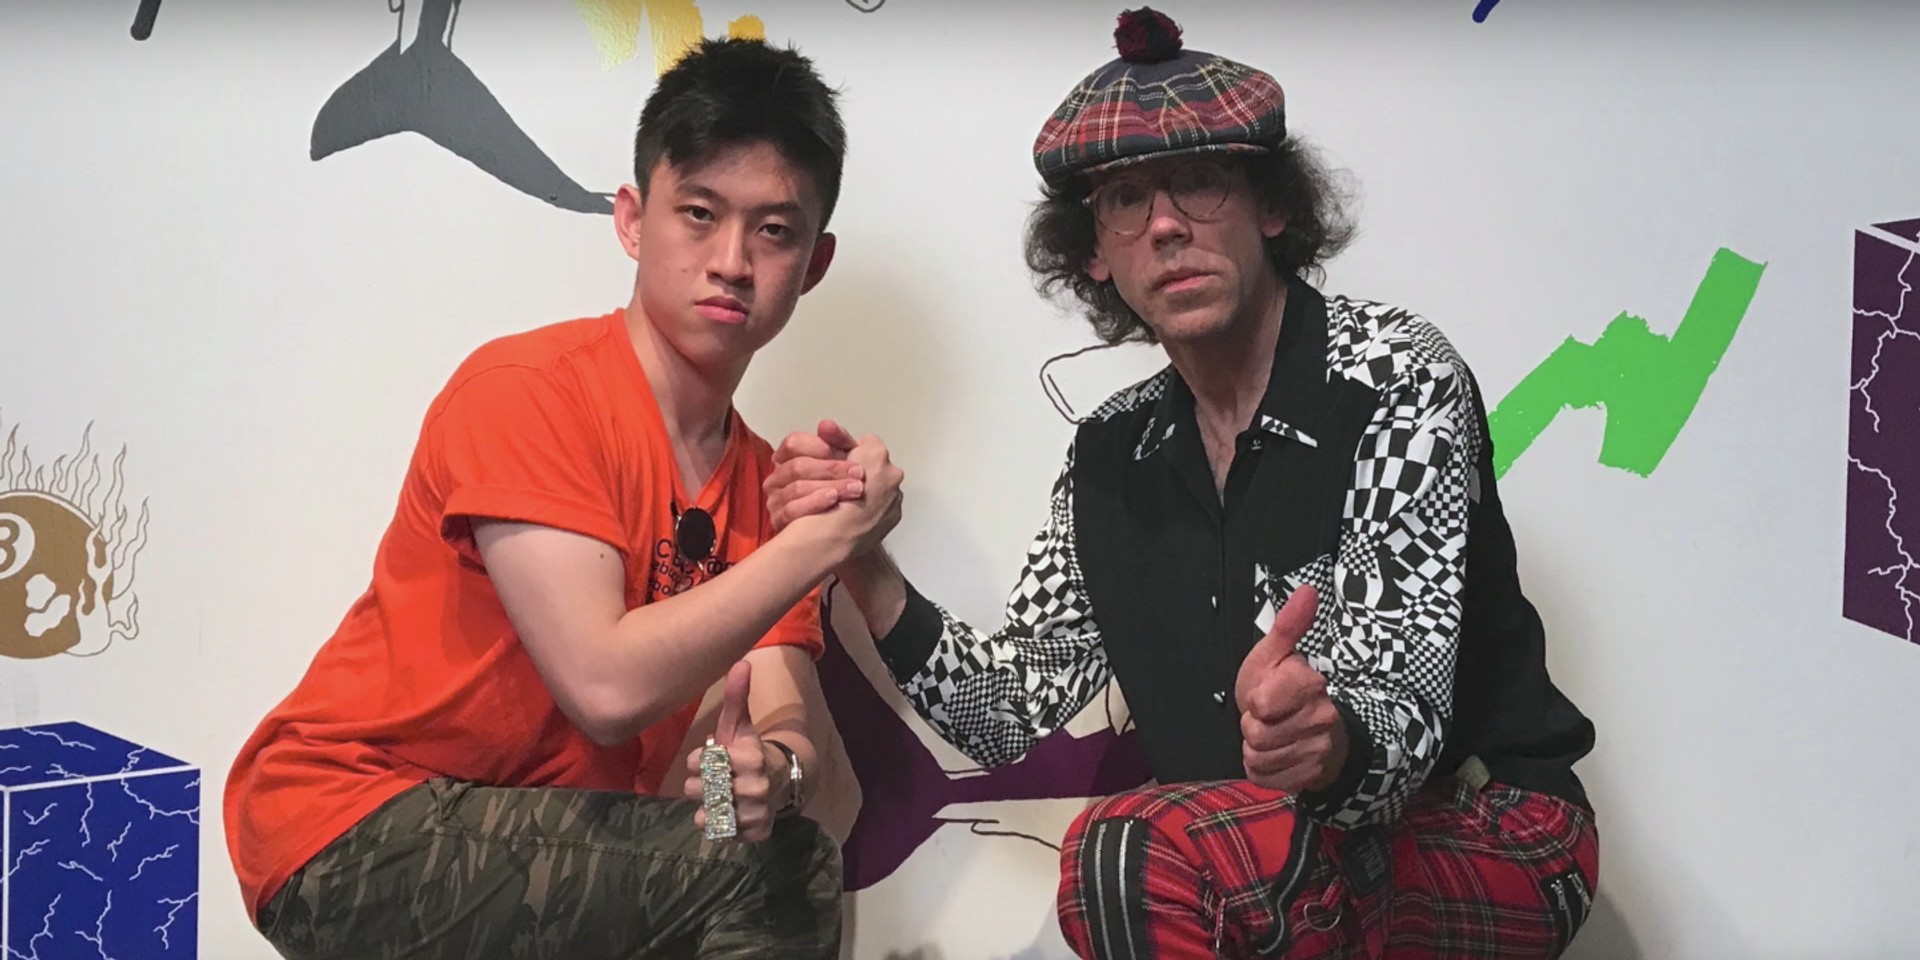 Rich Chigga shouts out Indomie and talks Rubik's cubes on Nardwuar interview — watch